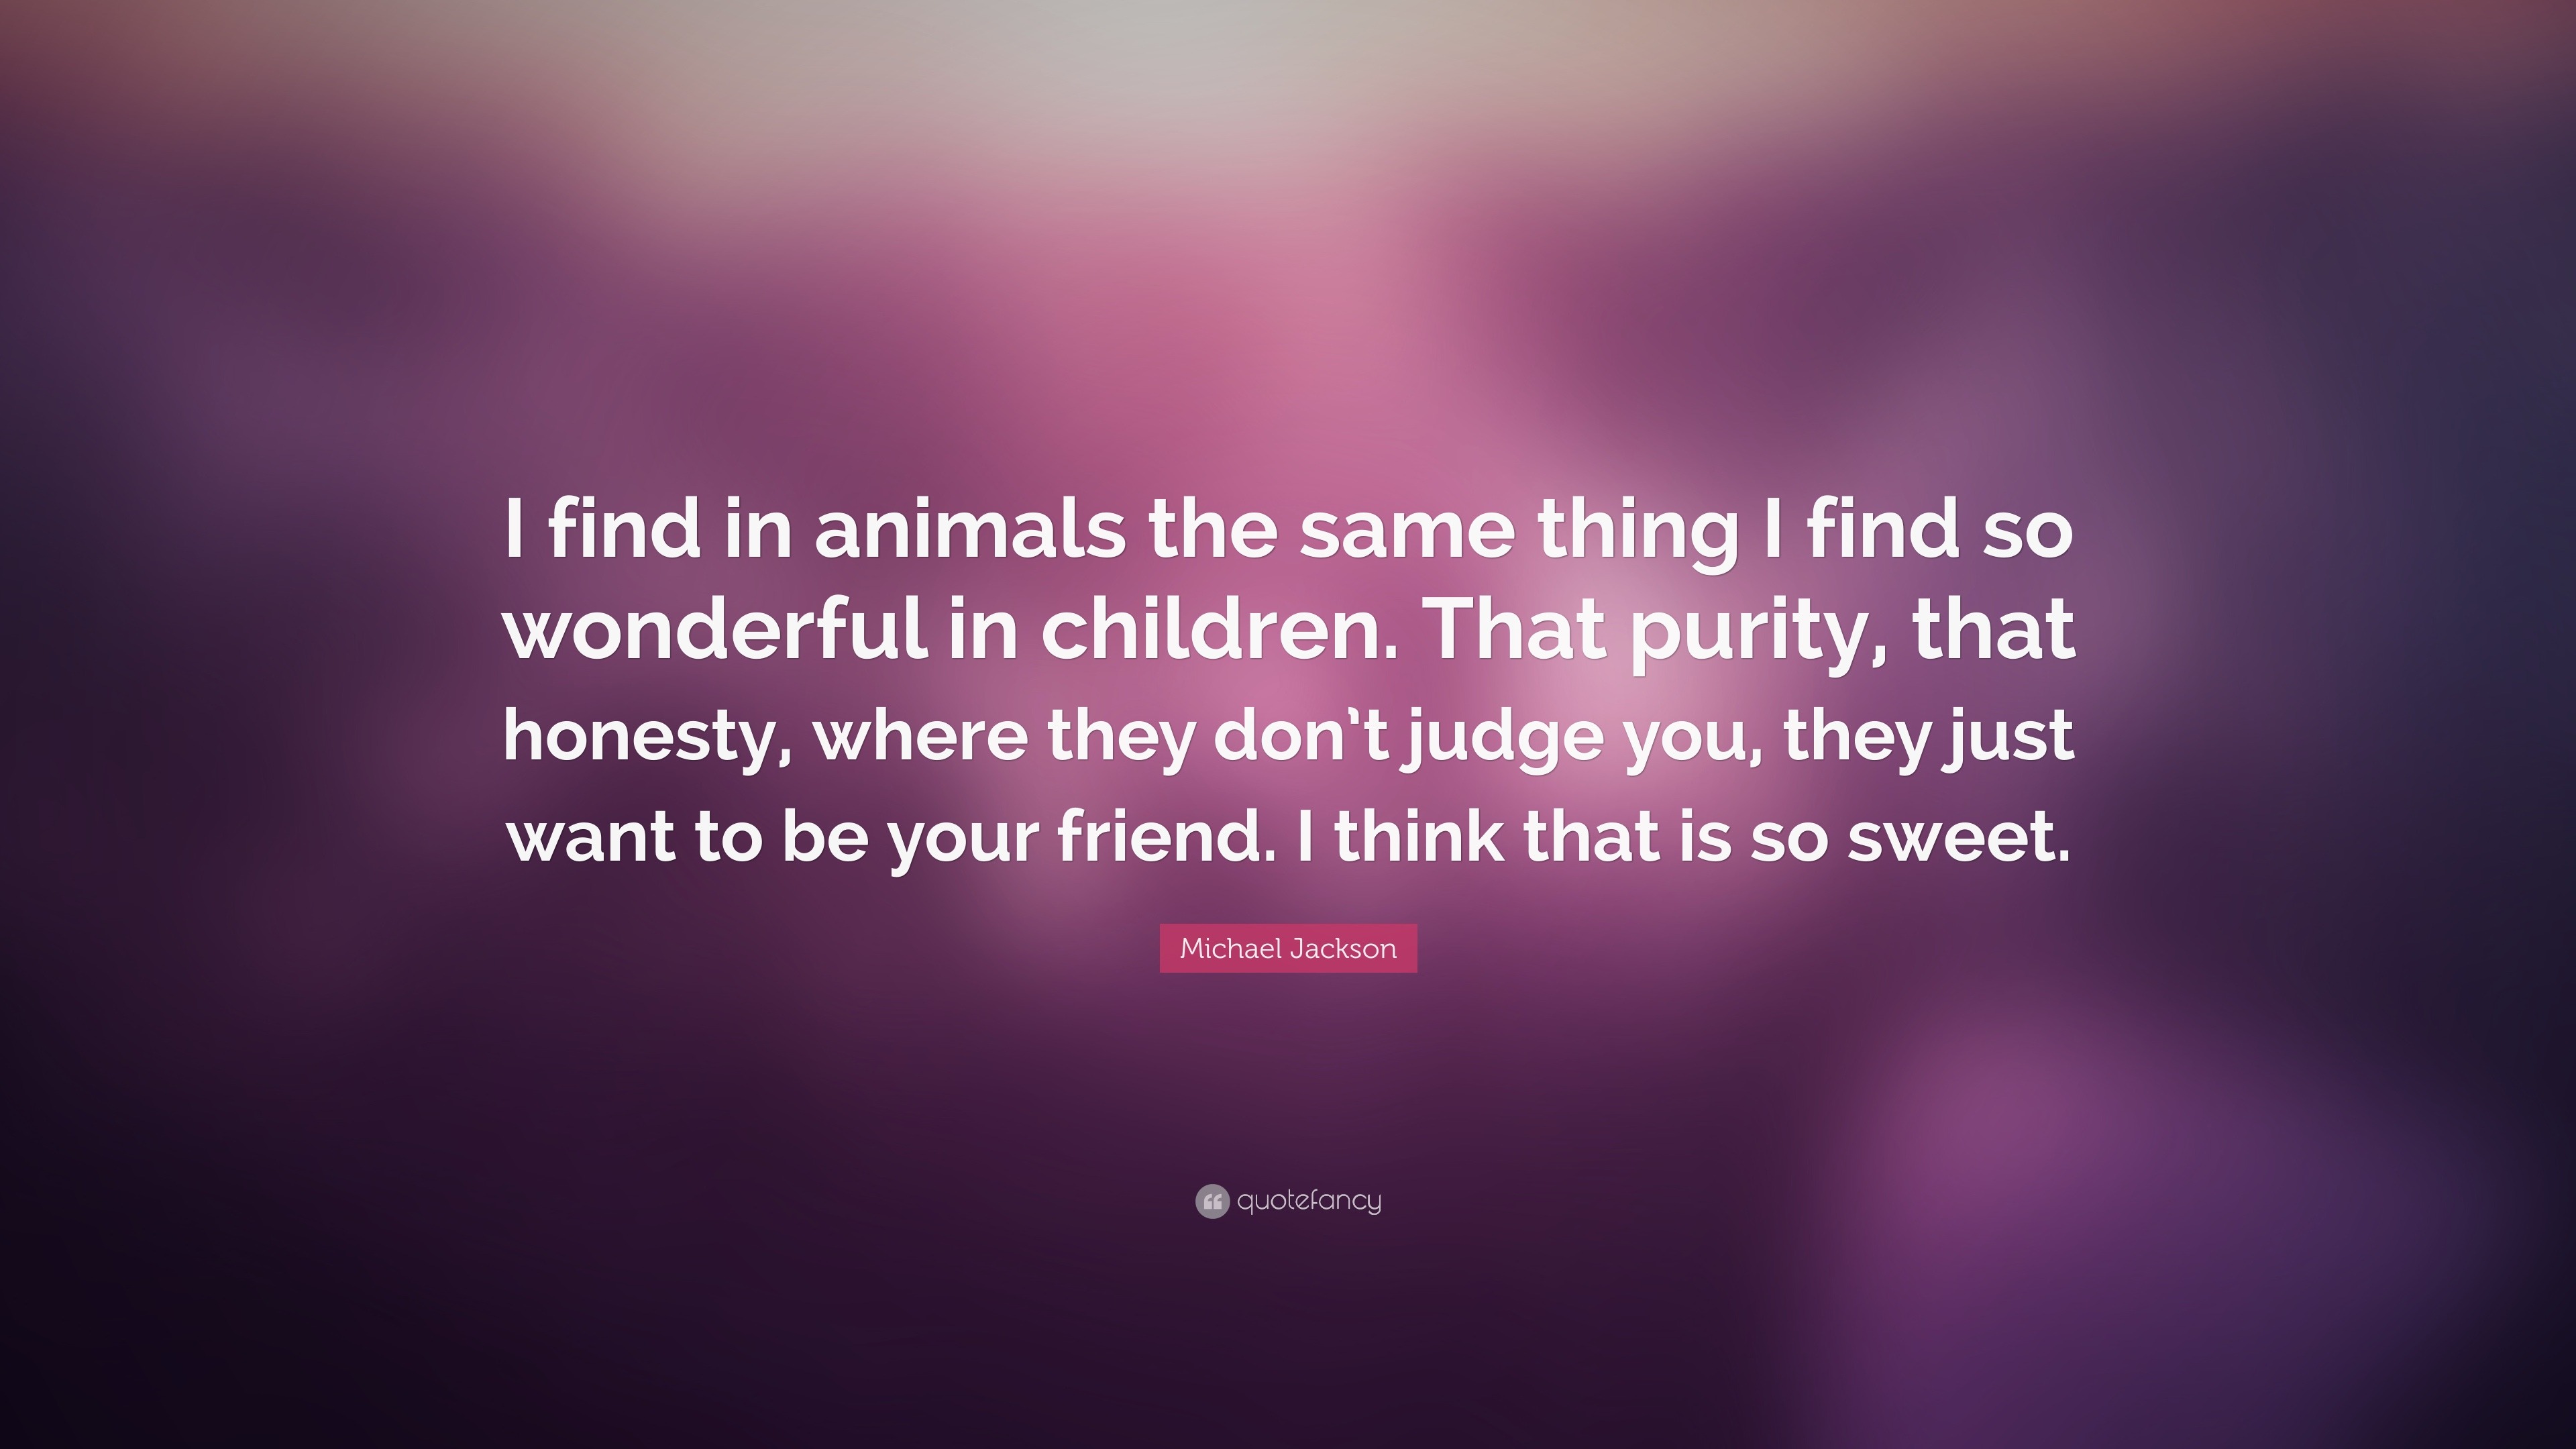 Michael Jackson Quote: “I find in animals the same thing I find so  wonderful in children. That purity, that honesty, where they don't judge  you,...”